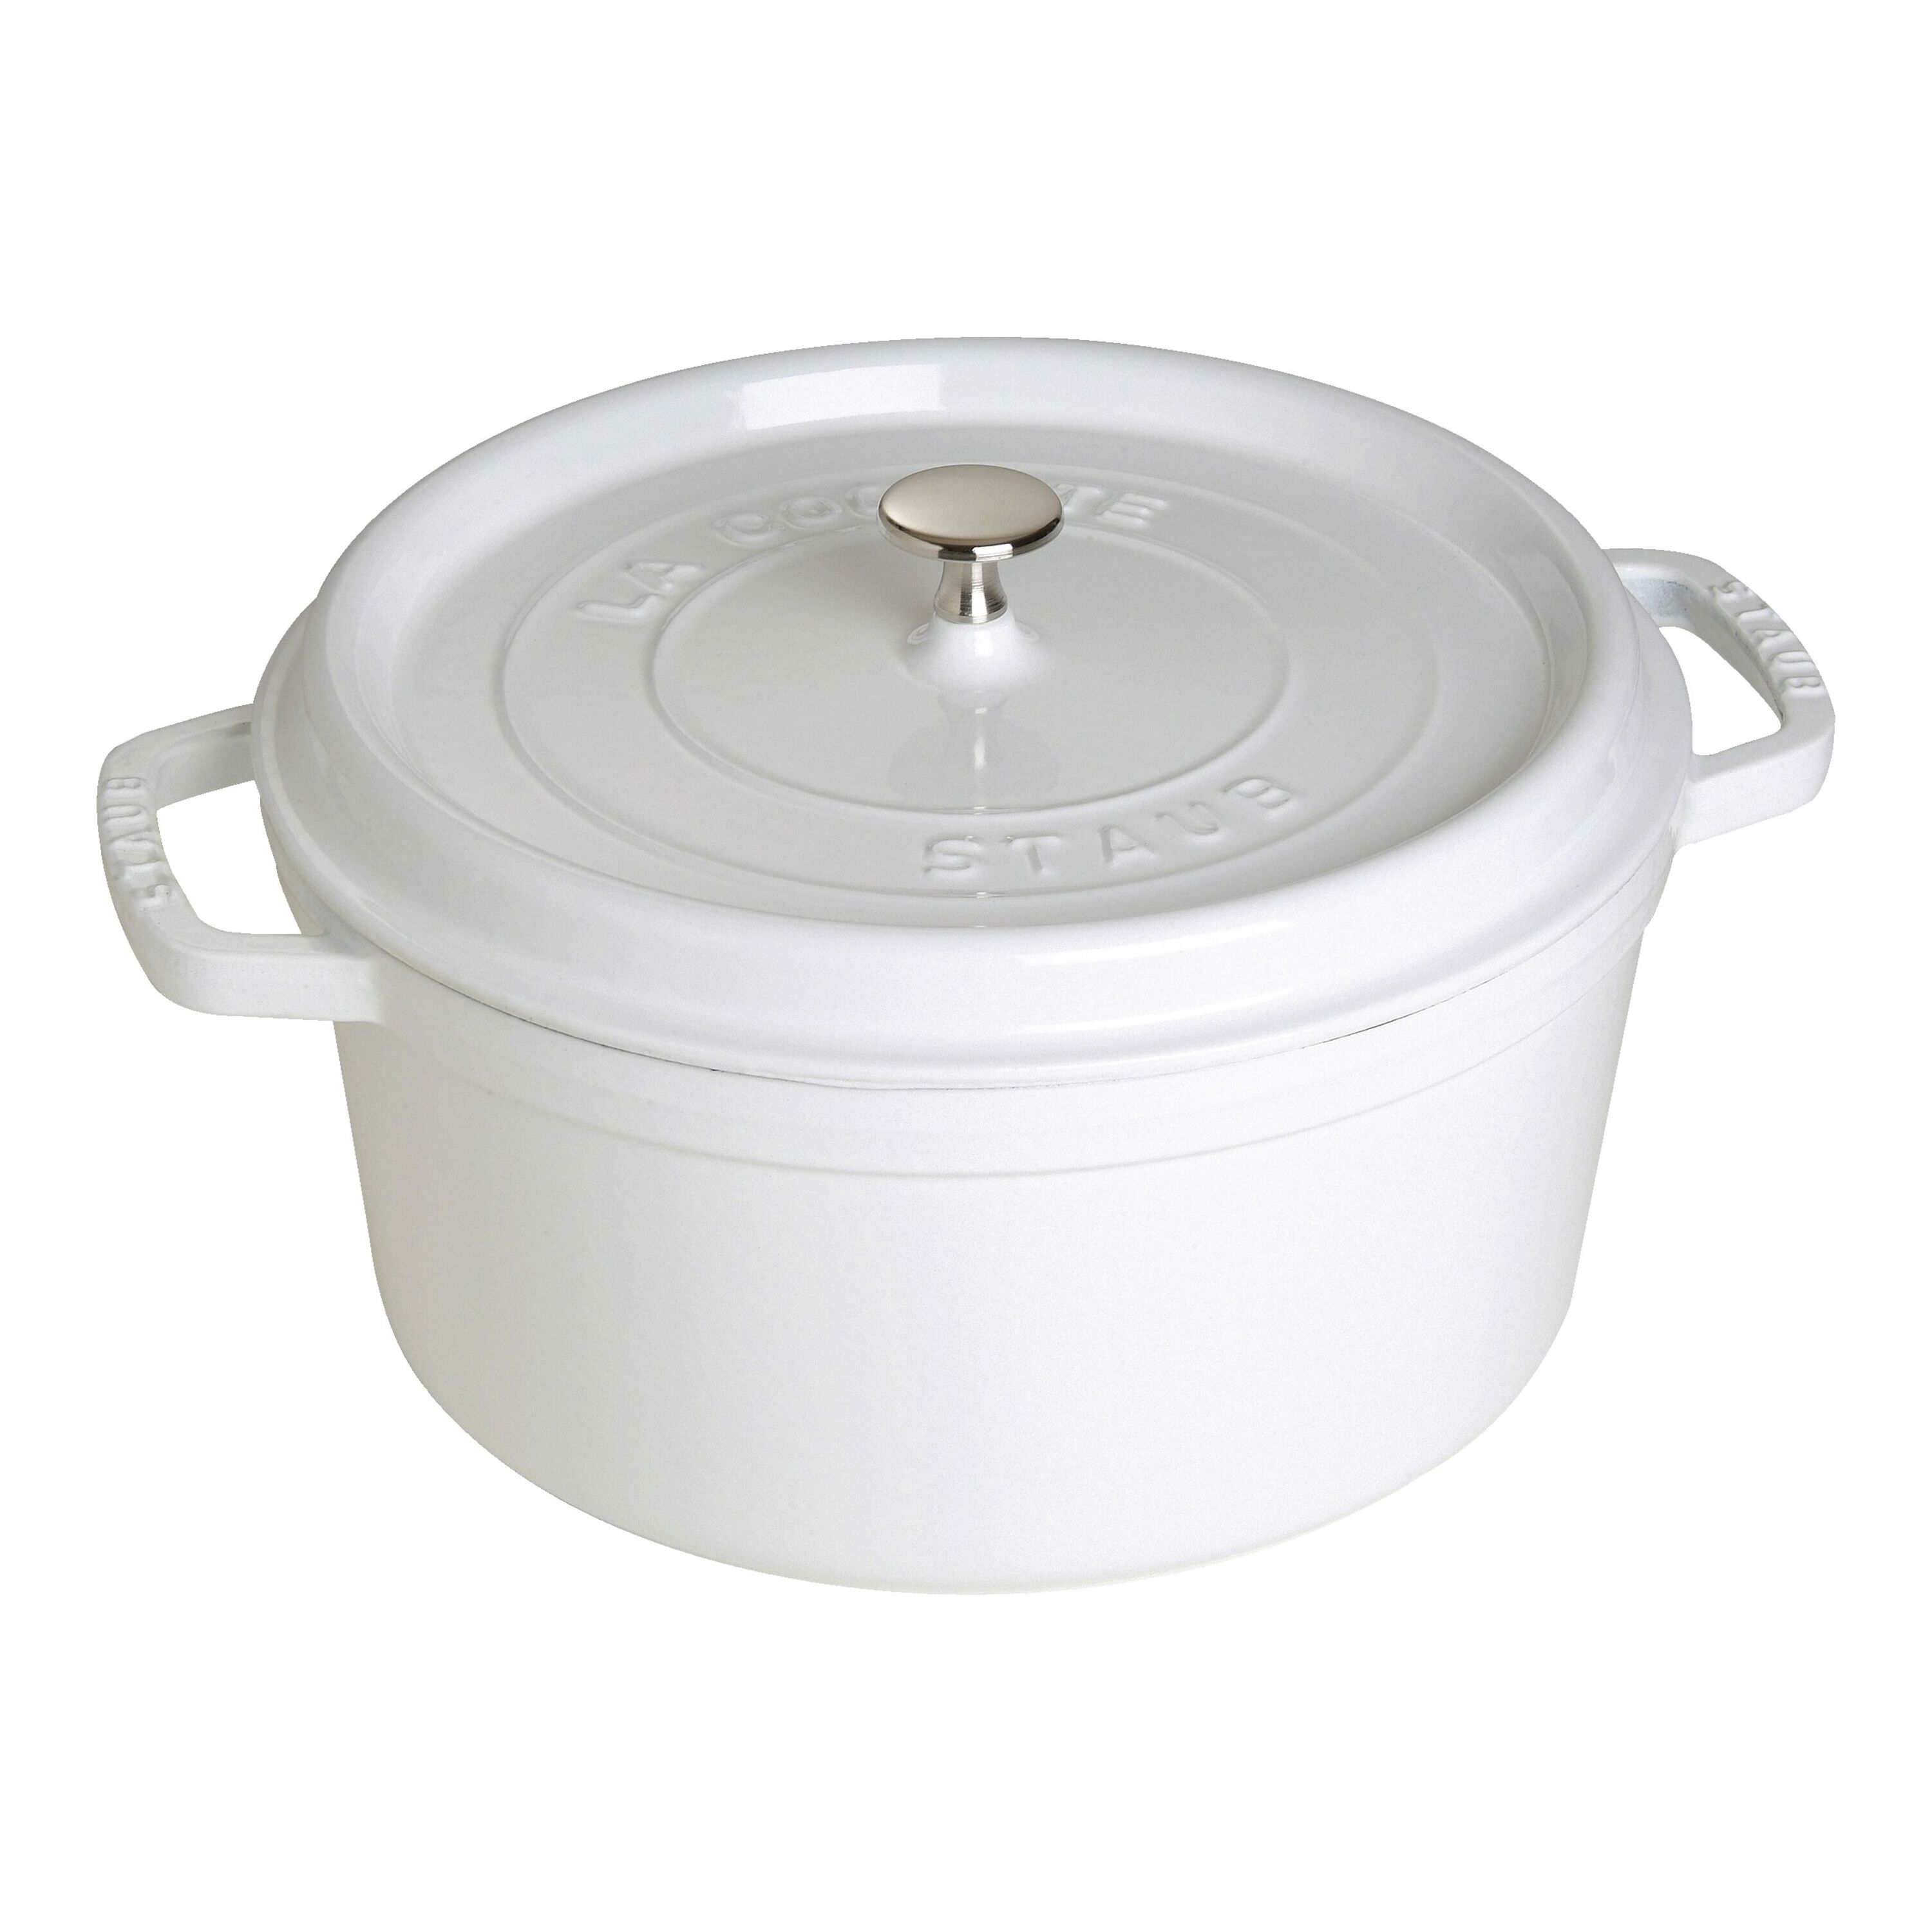 5qt Dutch Oven & Lid, Gold Speckled Collection